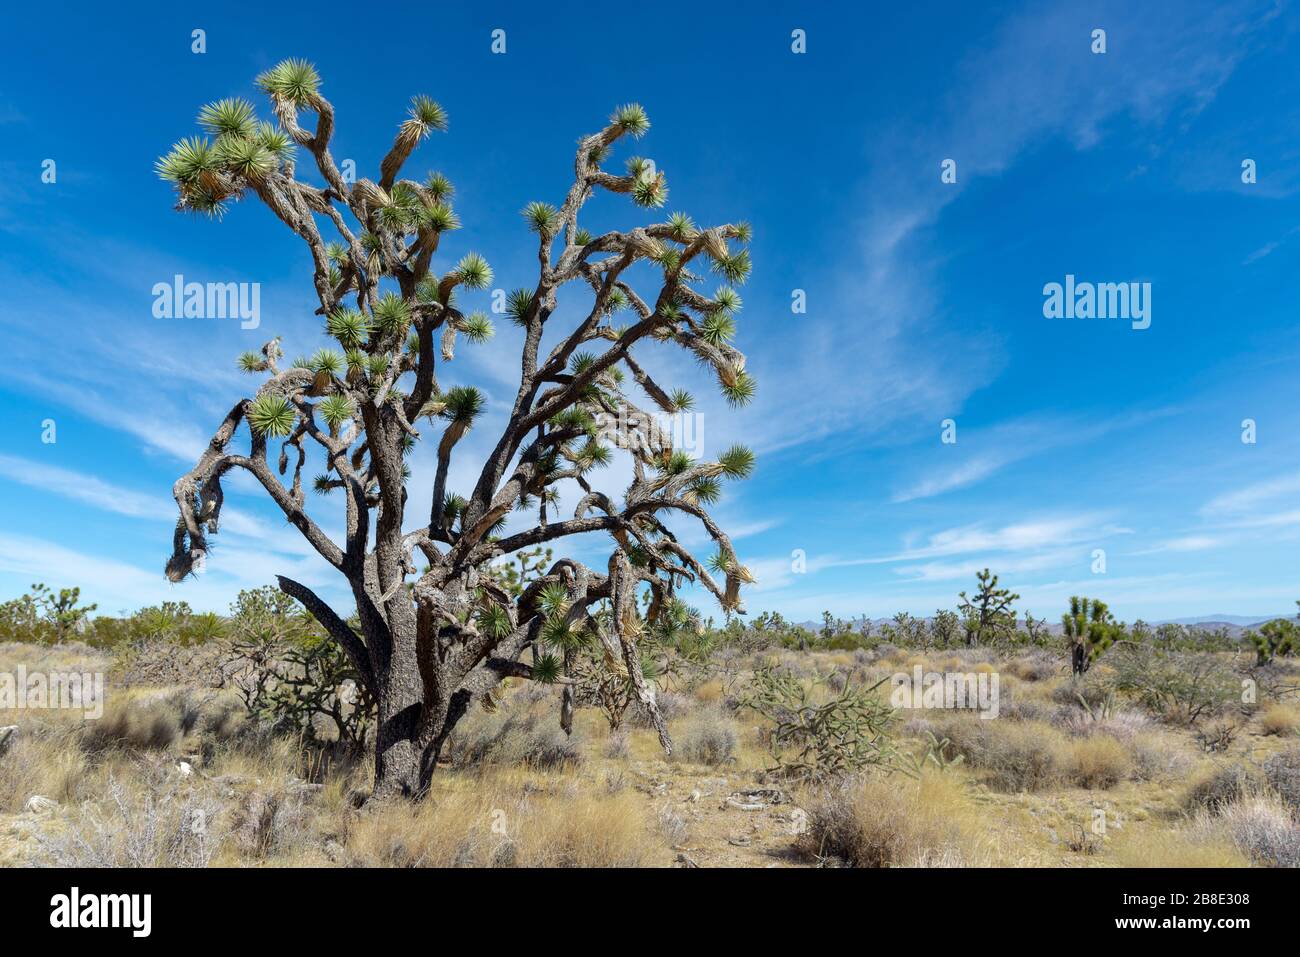 USA, Nevada, Clark County, New York Mountains. A Mojave Desert scene with Joshua Tree (Yucca brevifolia) in a wide open valley outside Searchlight. Stock Photo